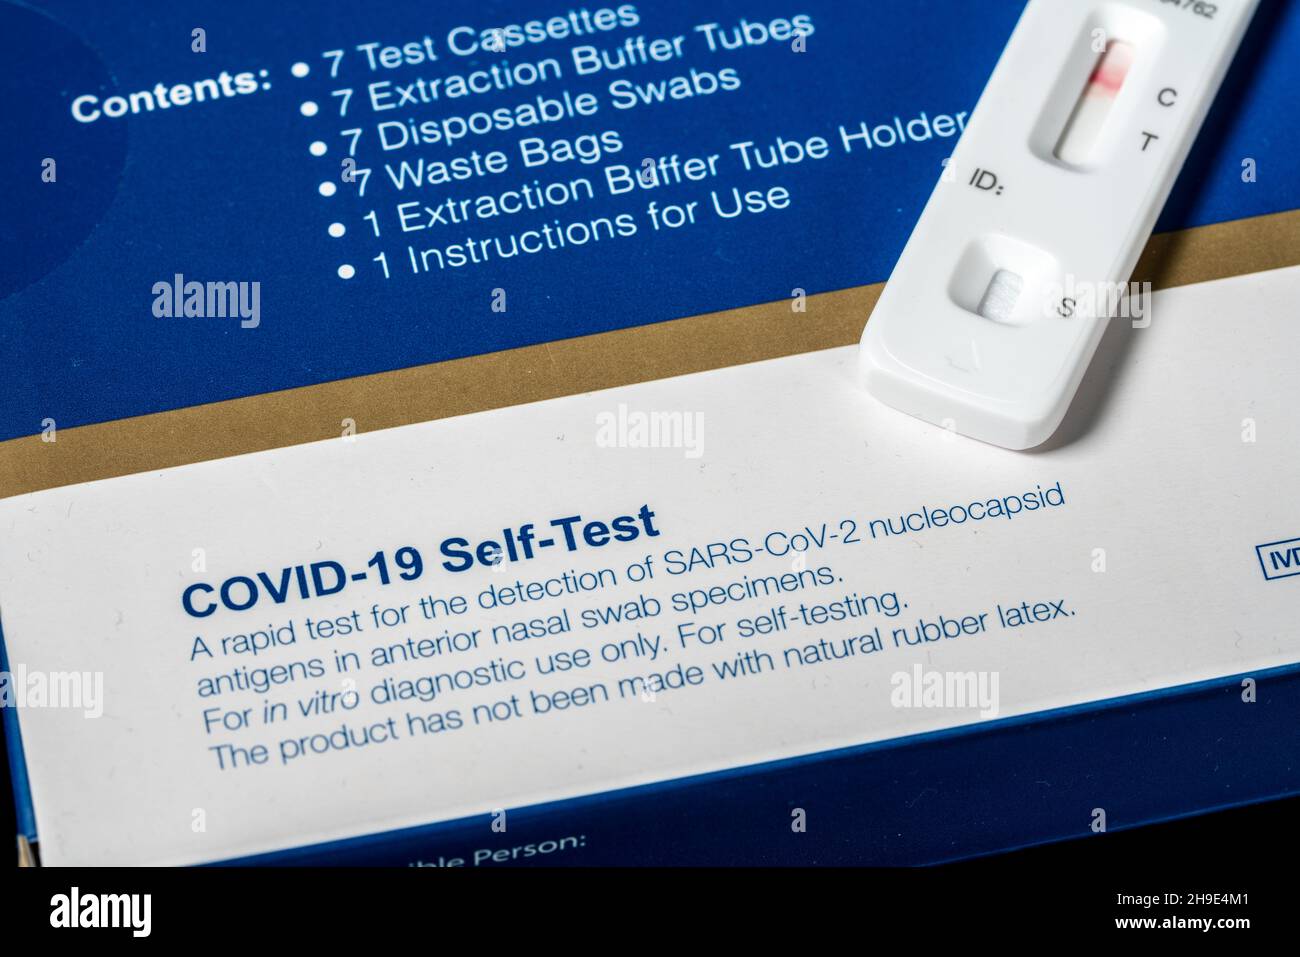 Box containing self test Covid-19 antigen tests with result showing a negative test for the coronavirus Stock Photo